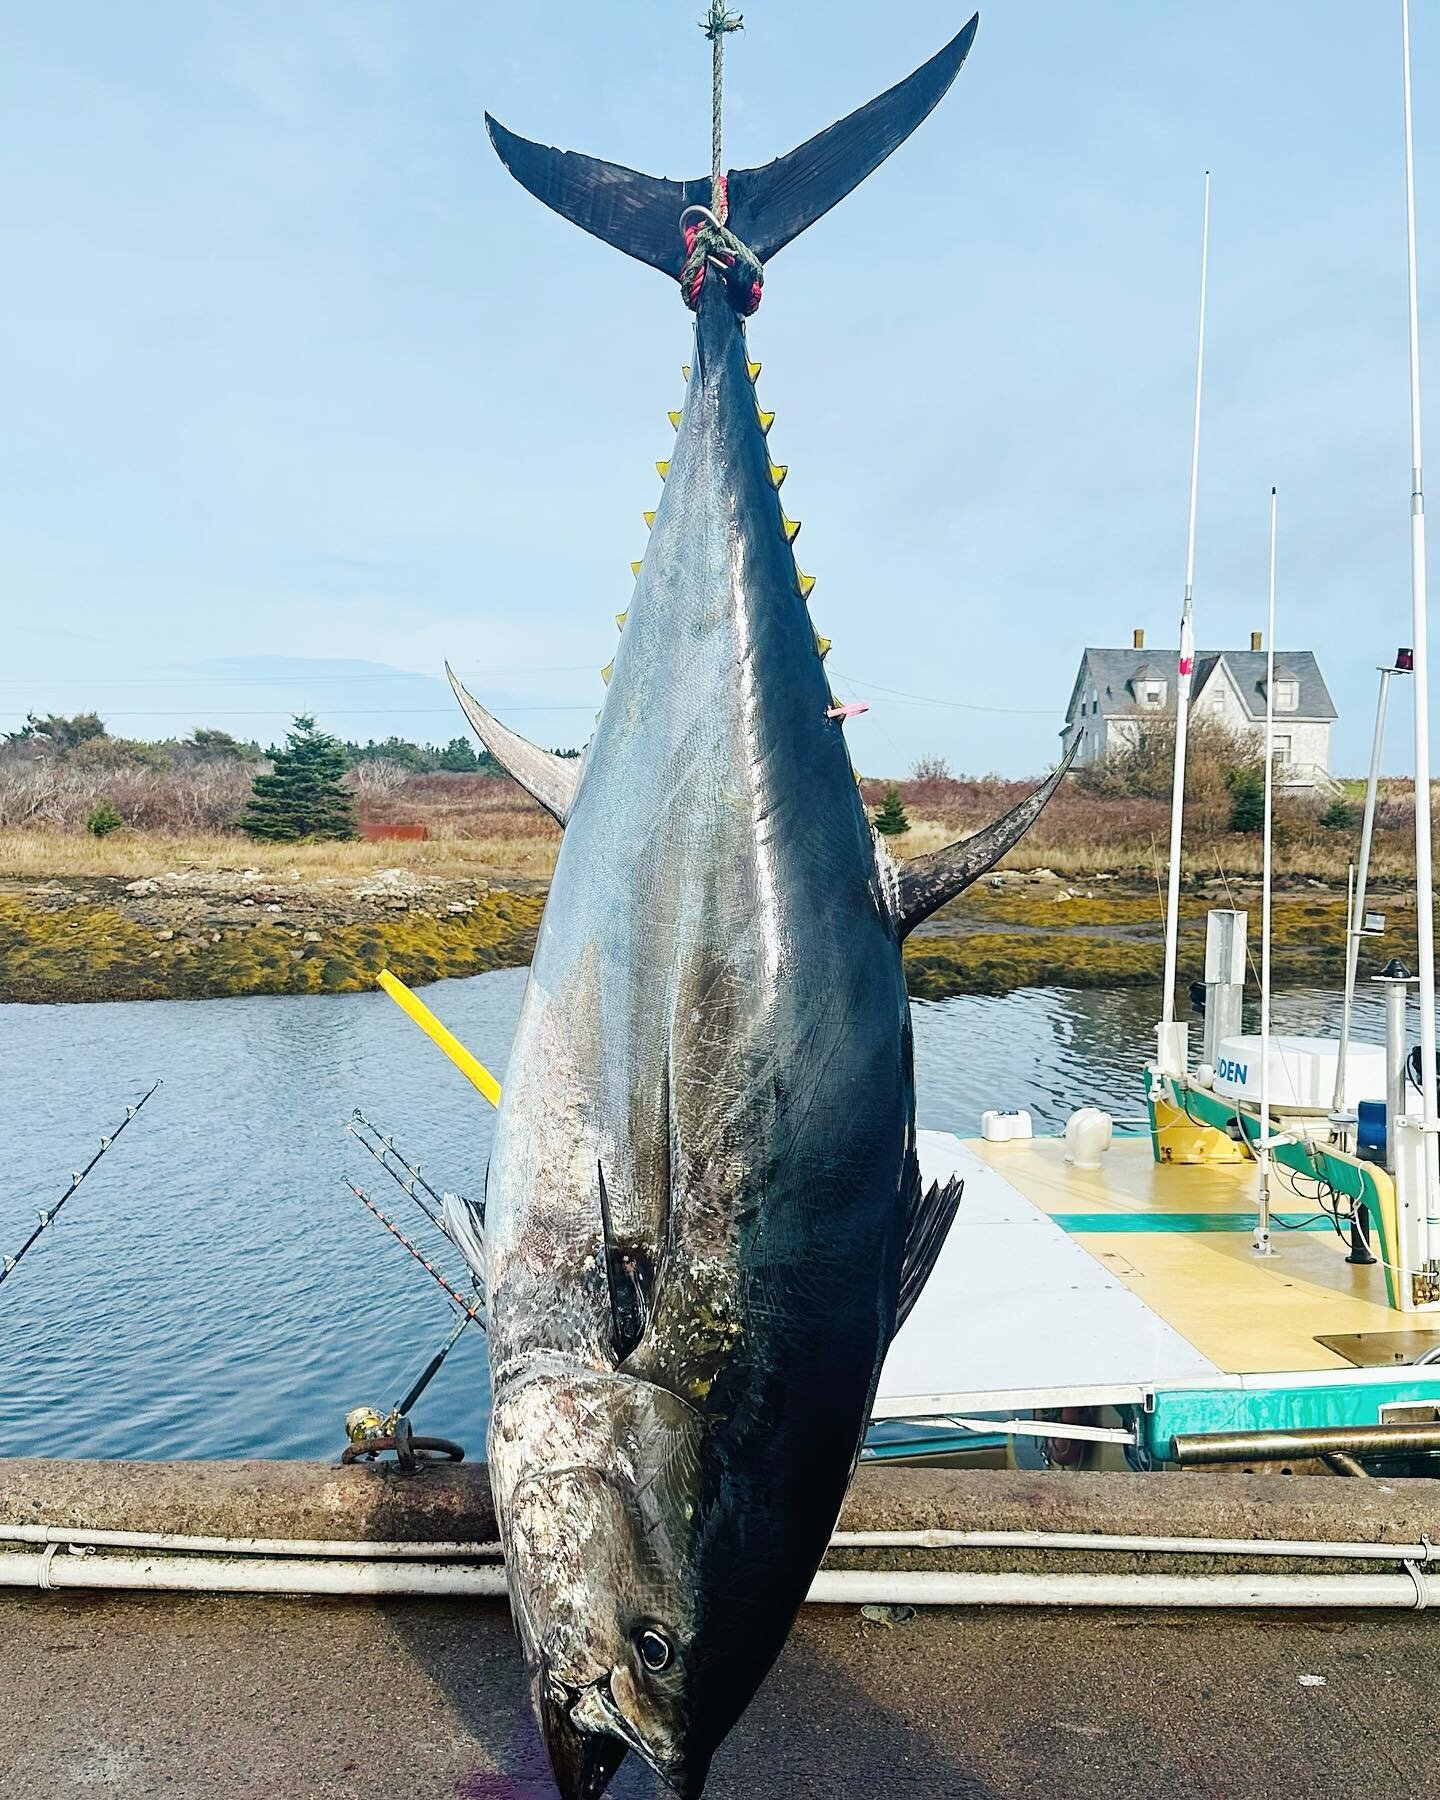 Season 2023 Prime dates are still available for making your dreams come true catching giant bluefins in Nova Scotia. Check it off your bucket lists✔️

WRT

#Tuna
#Saltlife
#InTheBite
#BigCatch
#PennReels
#Fishinglife
#TunaFishing
#FishingDay
#Sportfi